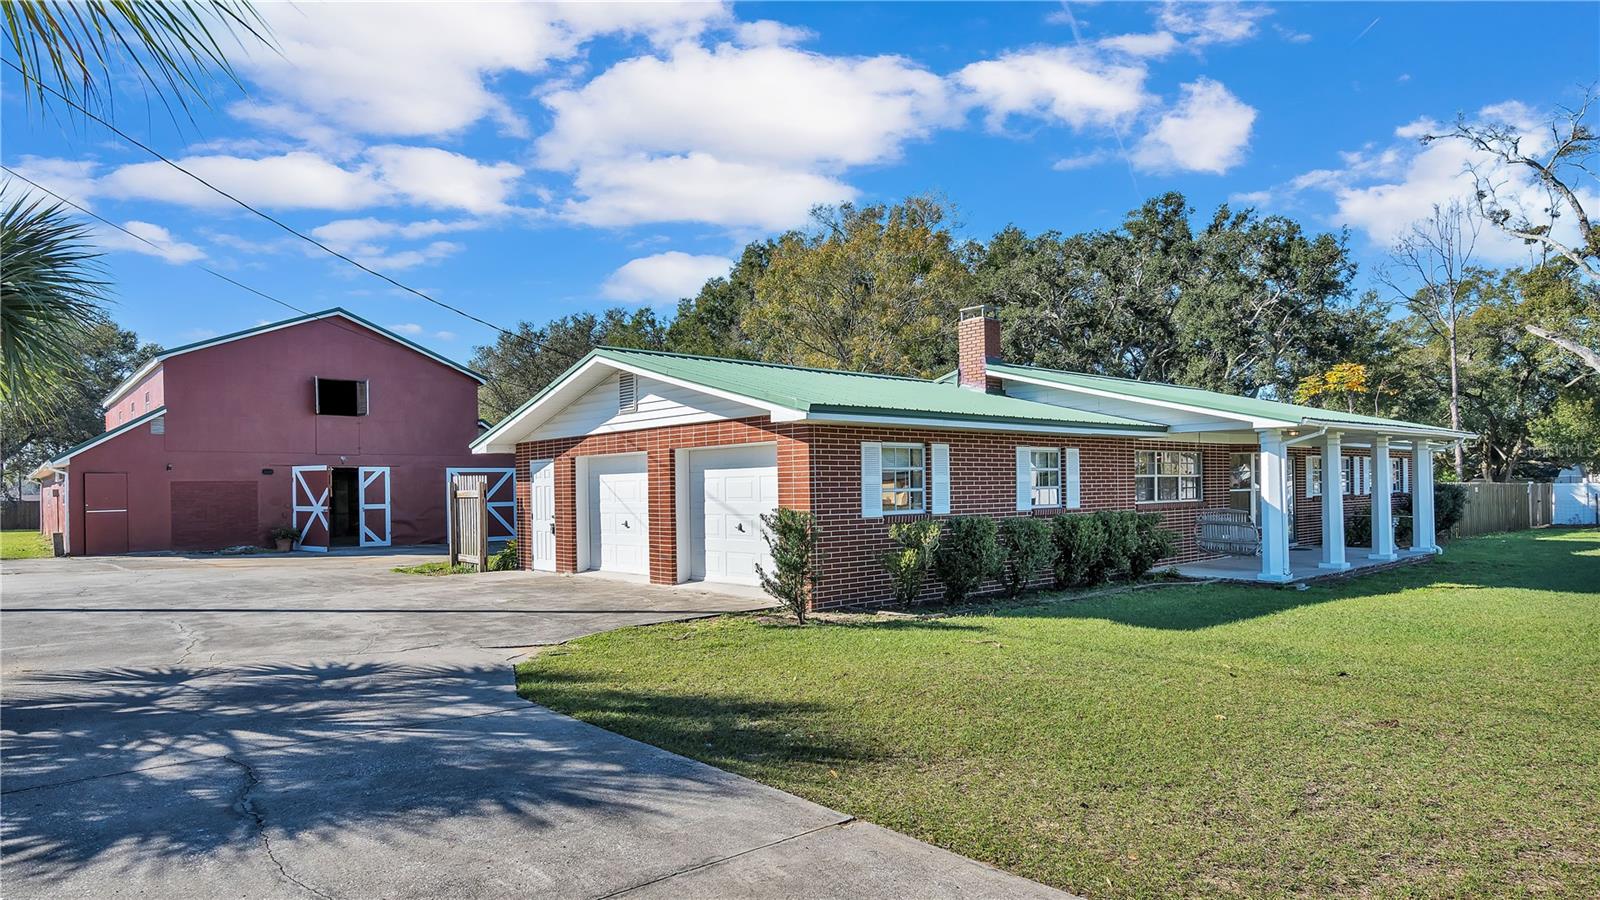 Details for 4125 County Road 540a, LAKELAND, FL 33813